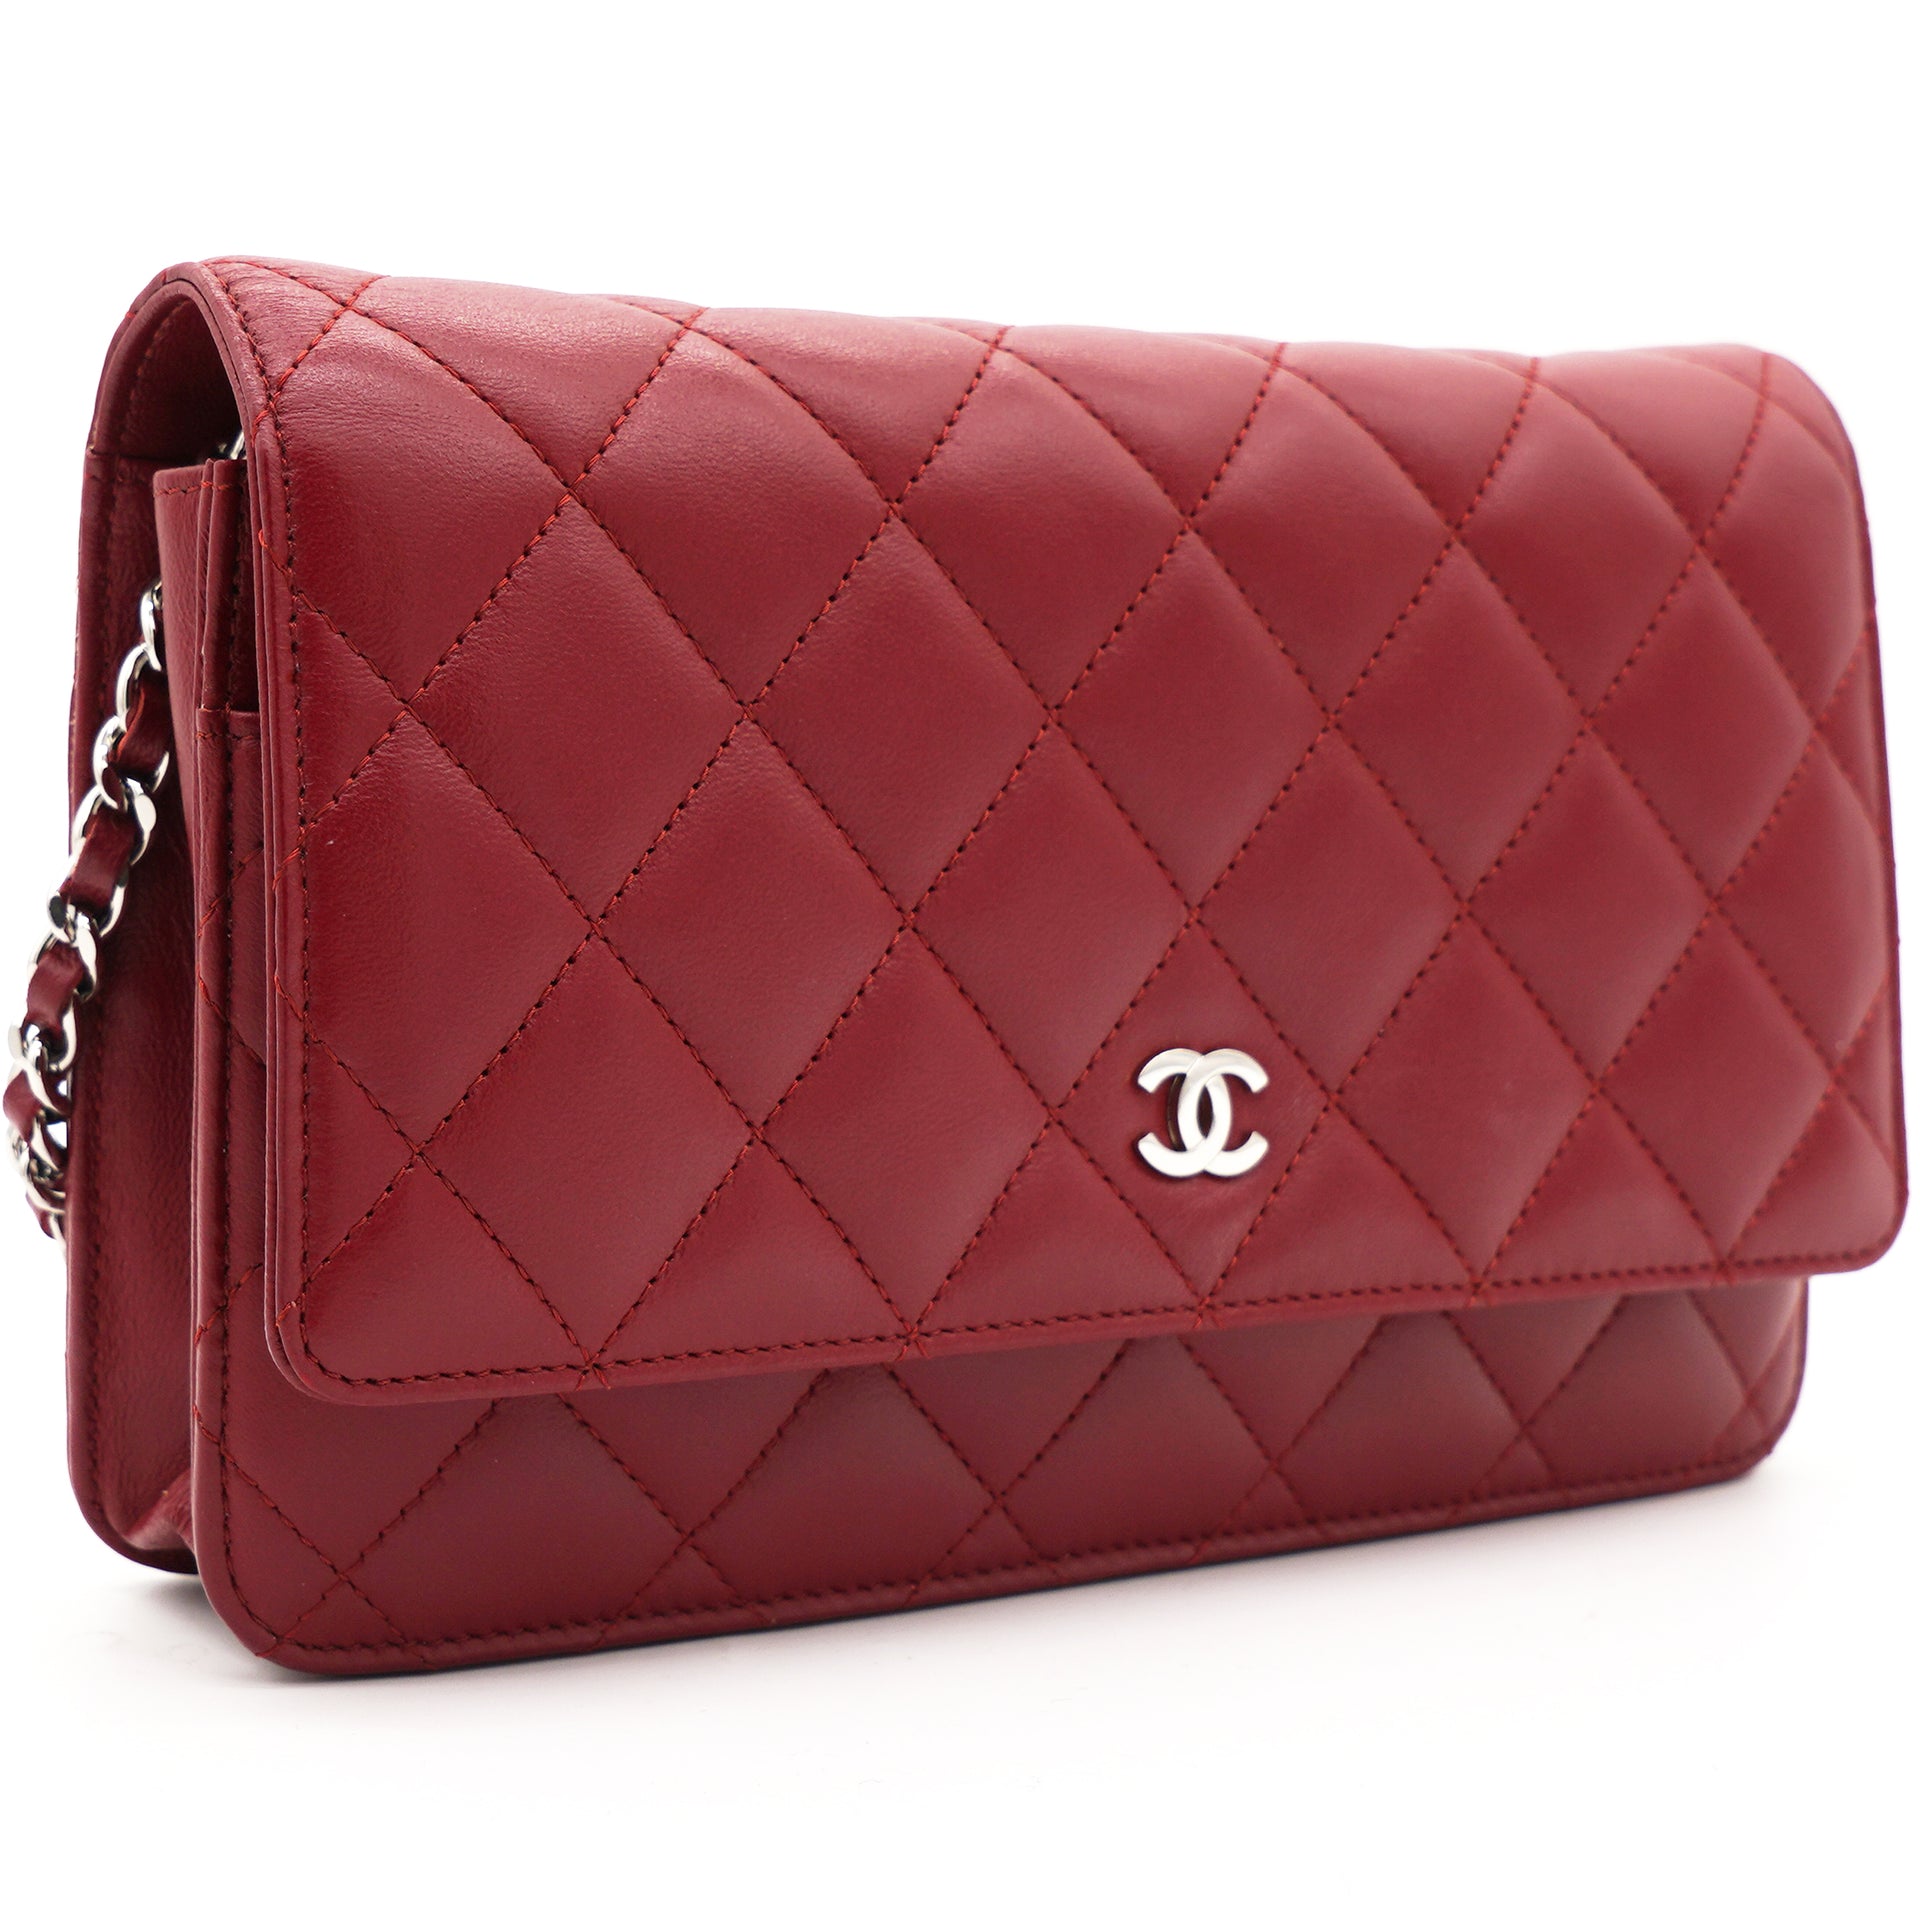 woc chanel red